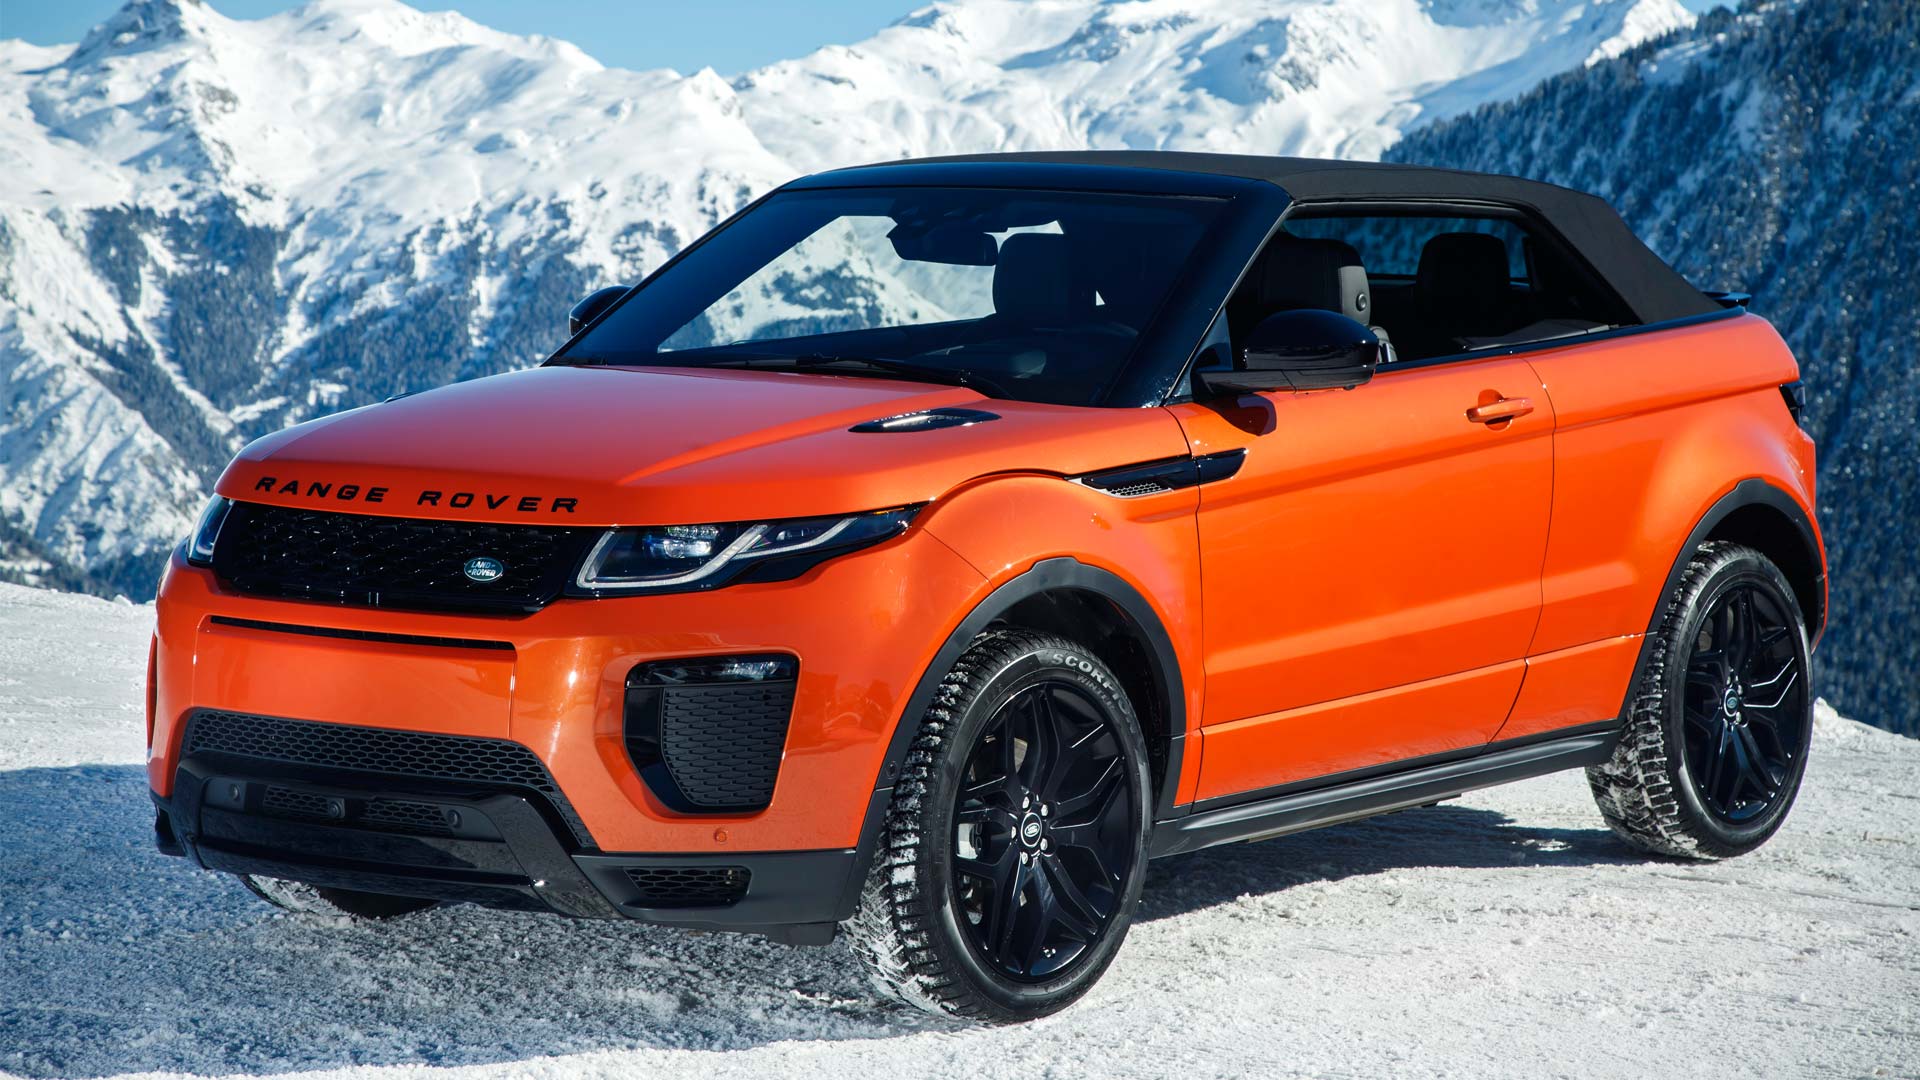 Range Rover Evoque Convertible Launched At Rs 6953 Lakh Autodevot